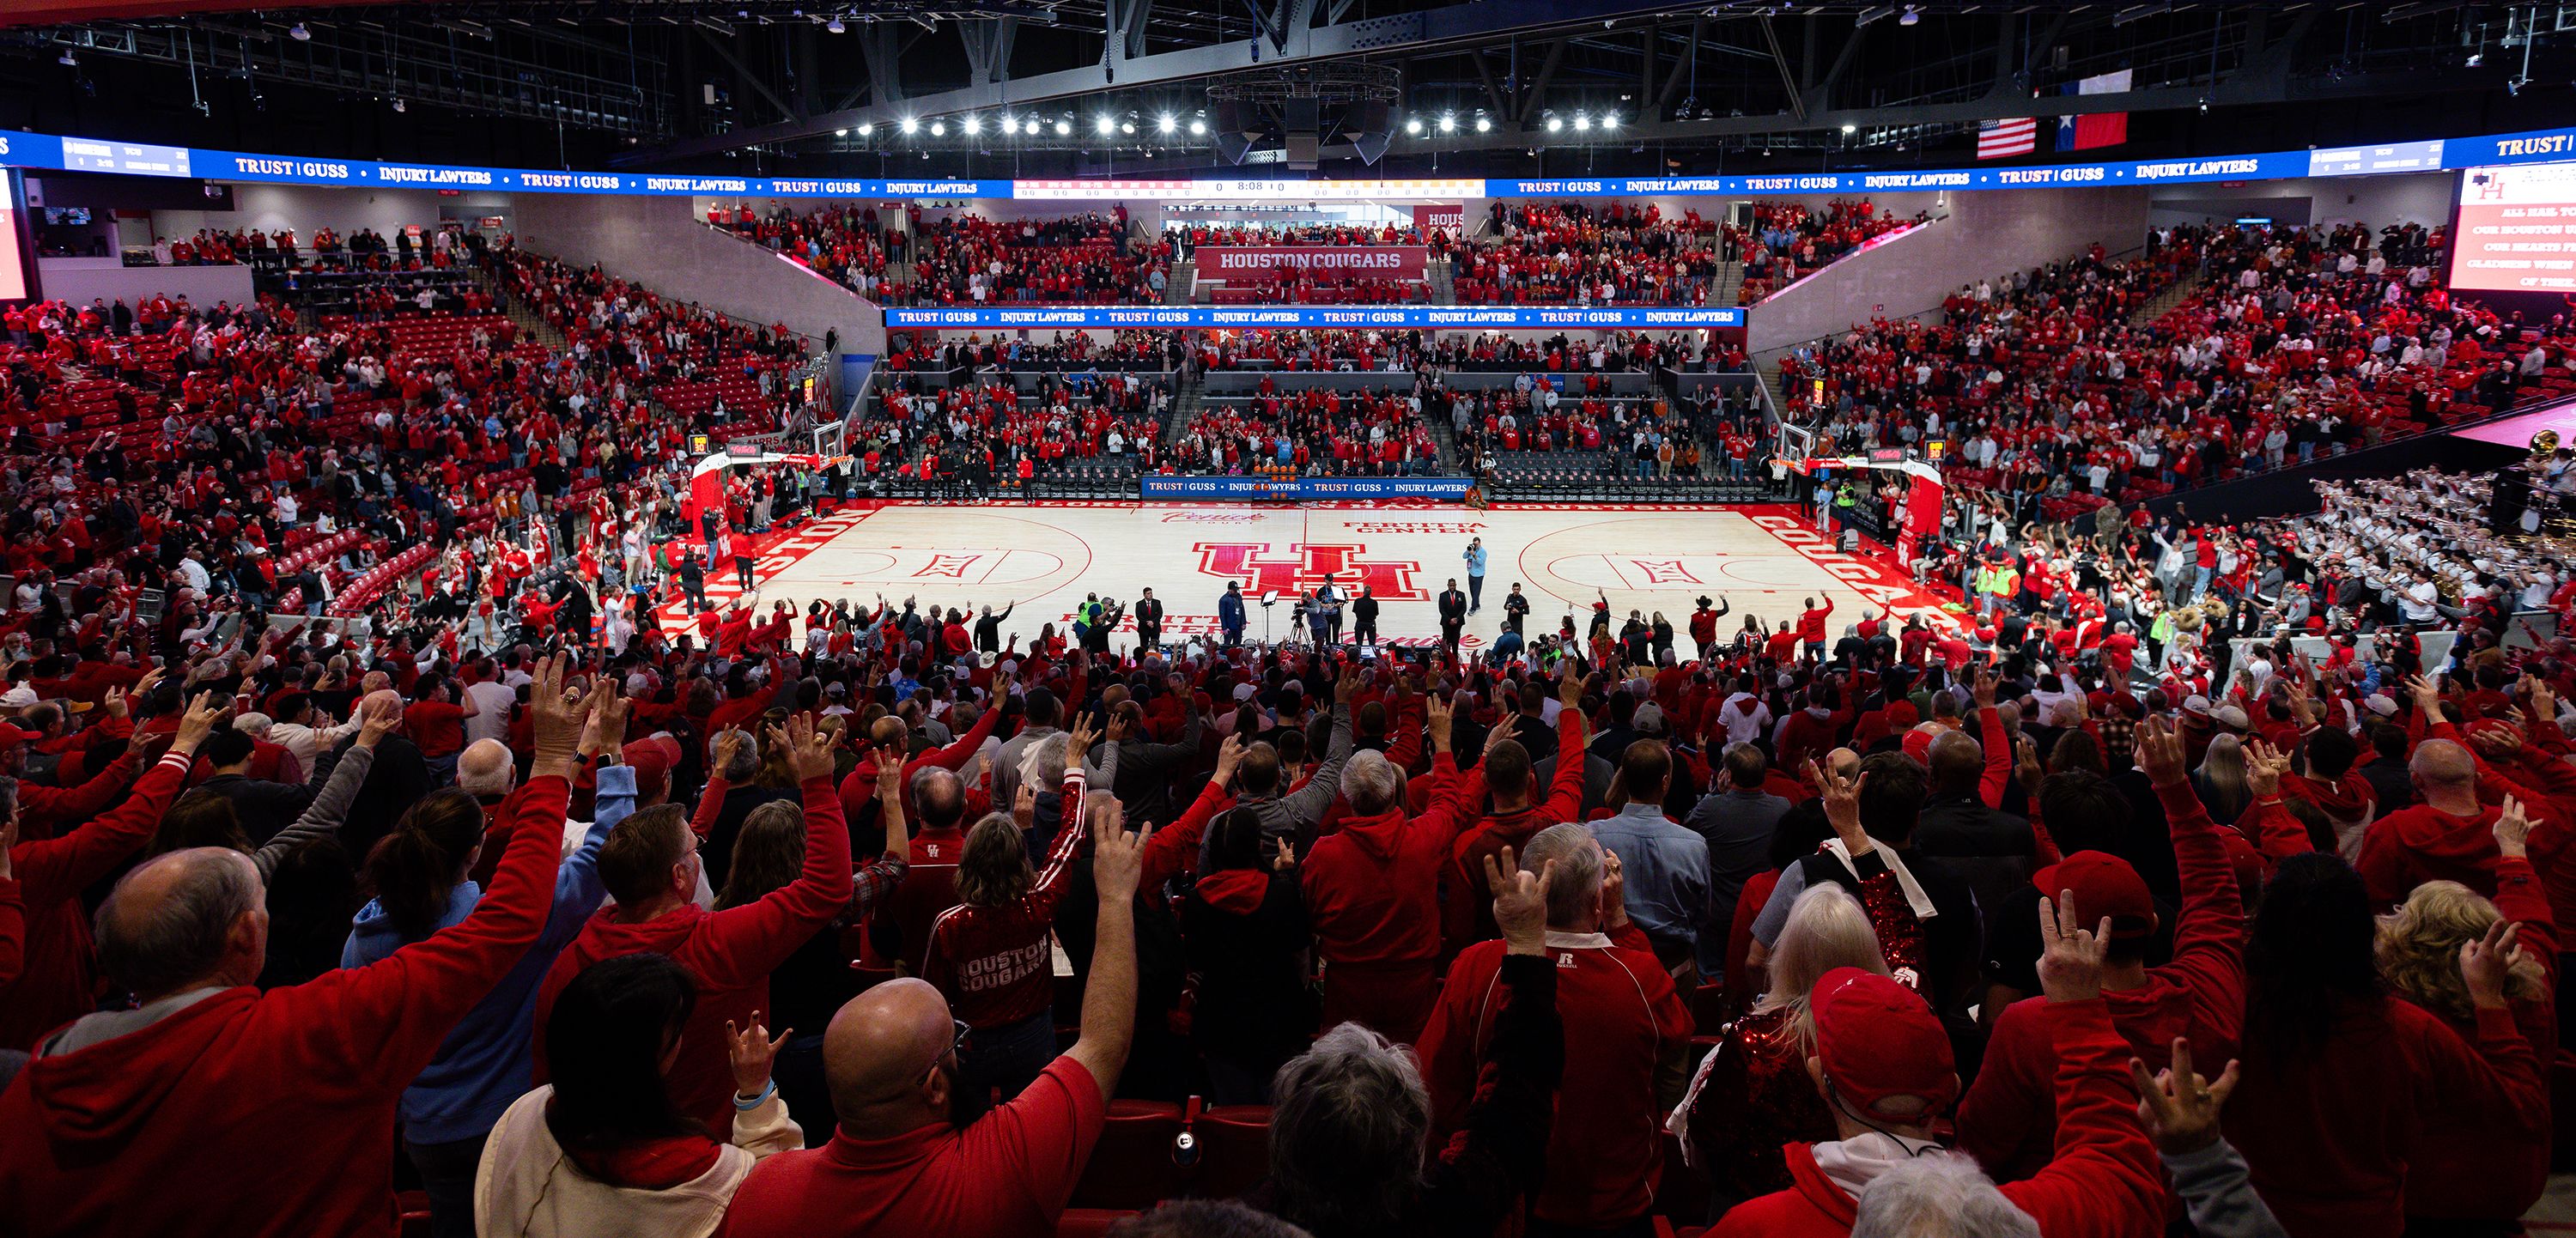 A photograph of a home UH basketball game, with an arena full of UH fans cheering on the team.